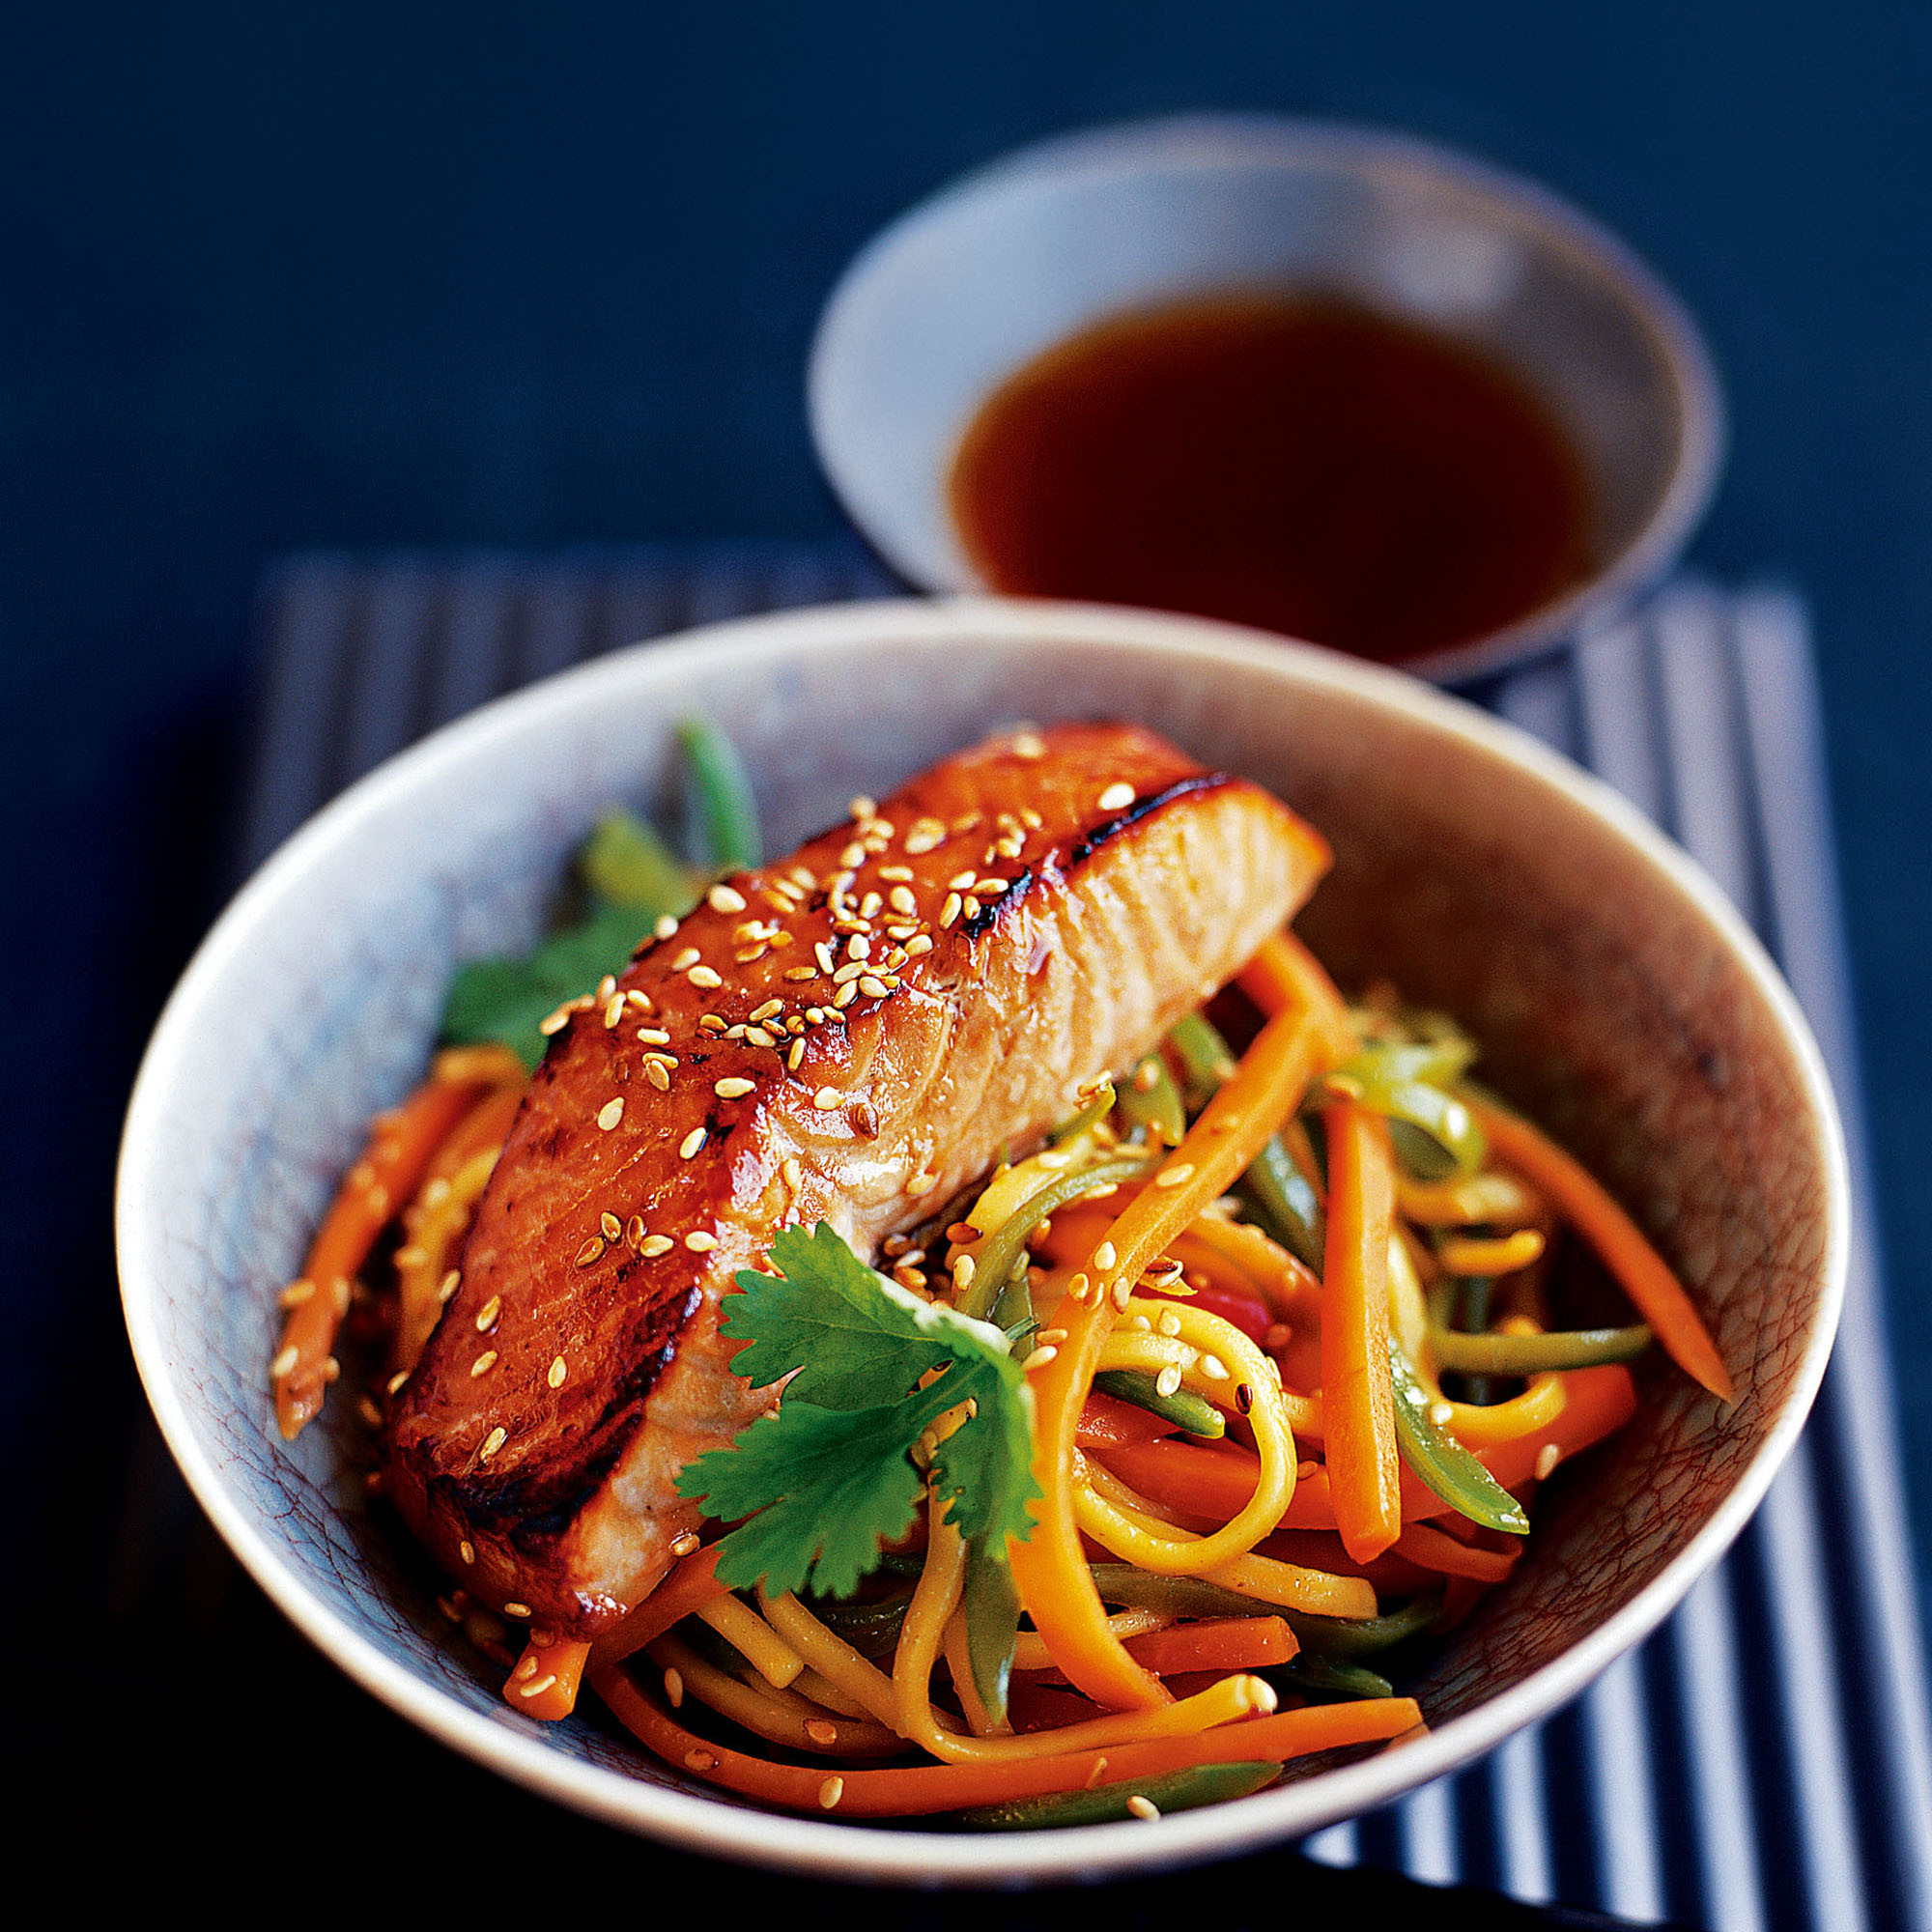 Salmon And Noodles
 Japanese Style Salmon With Noodle Stir Fry